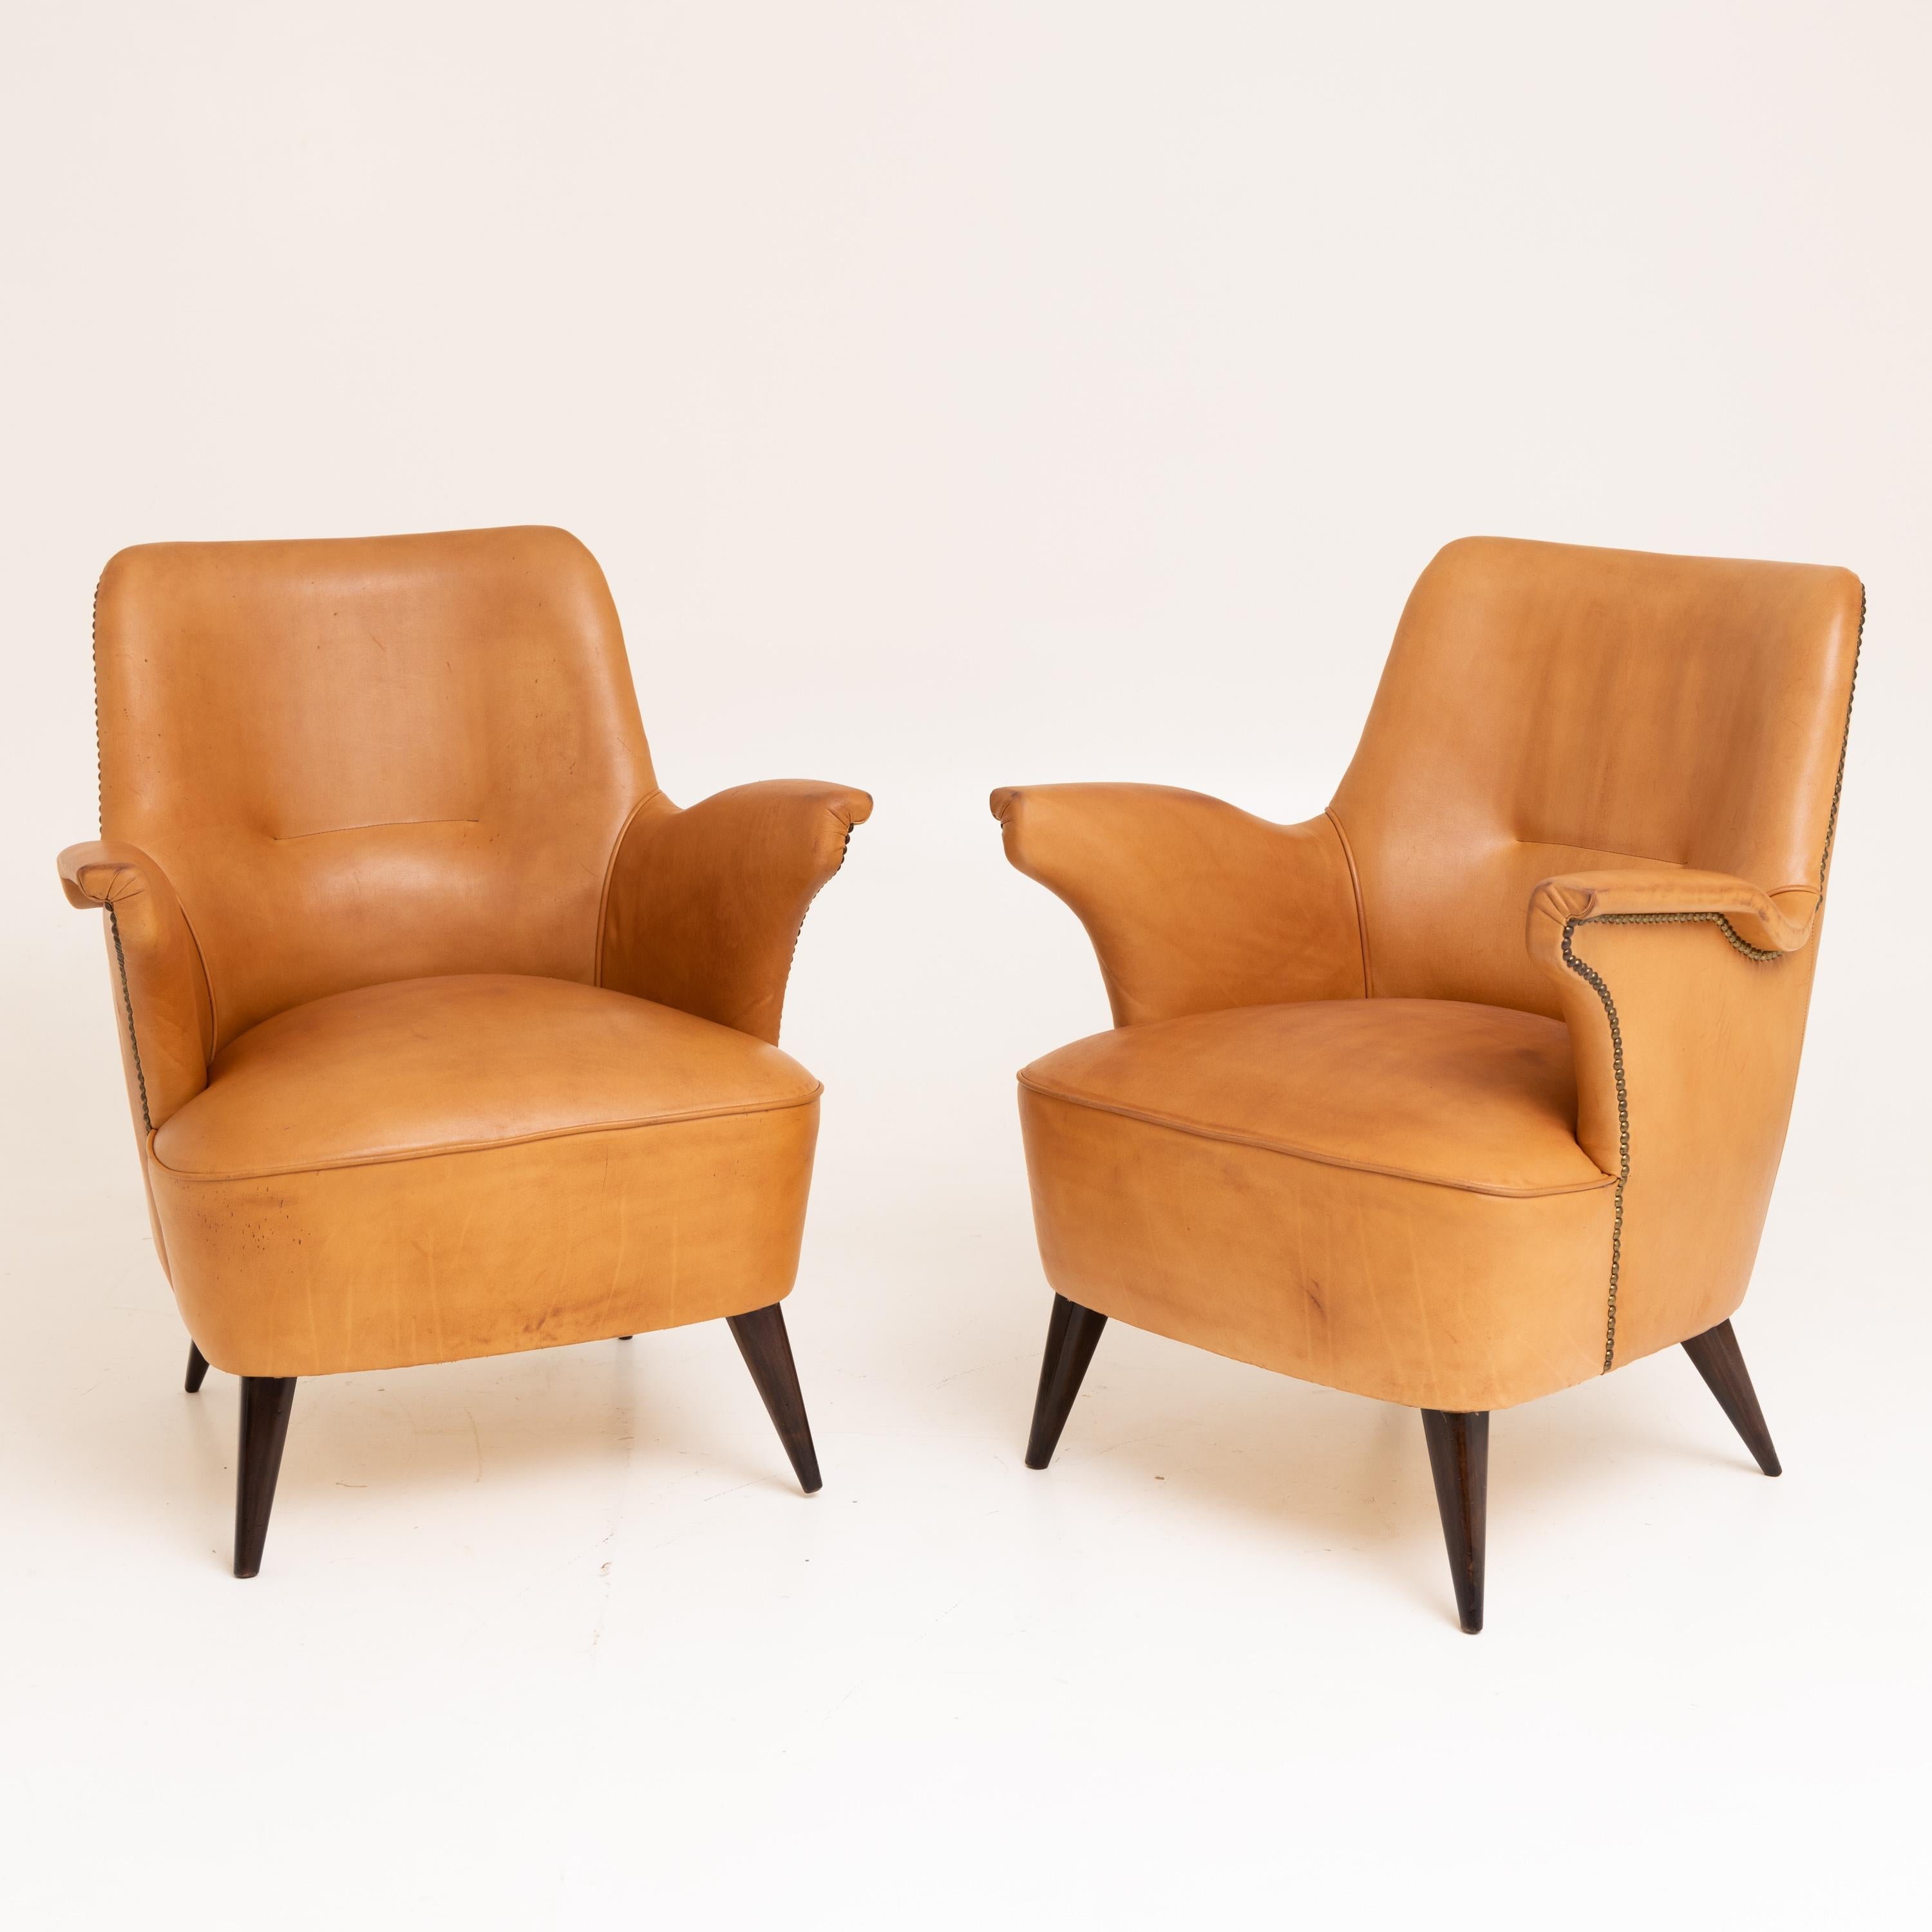 Two armchairs, attributed to Giovanni Zoncada (1898-1988), with brown imitation leather upholstery on conical wooden feet.